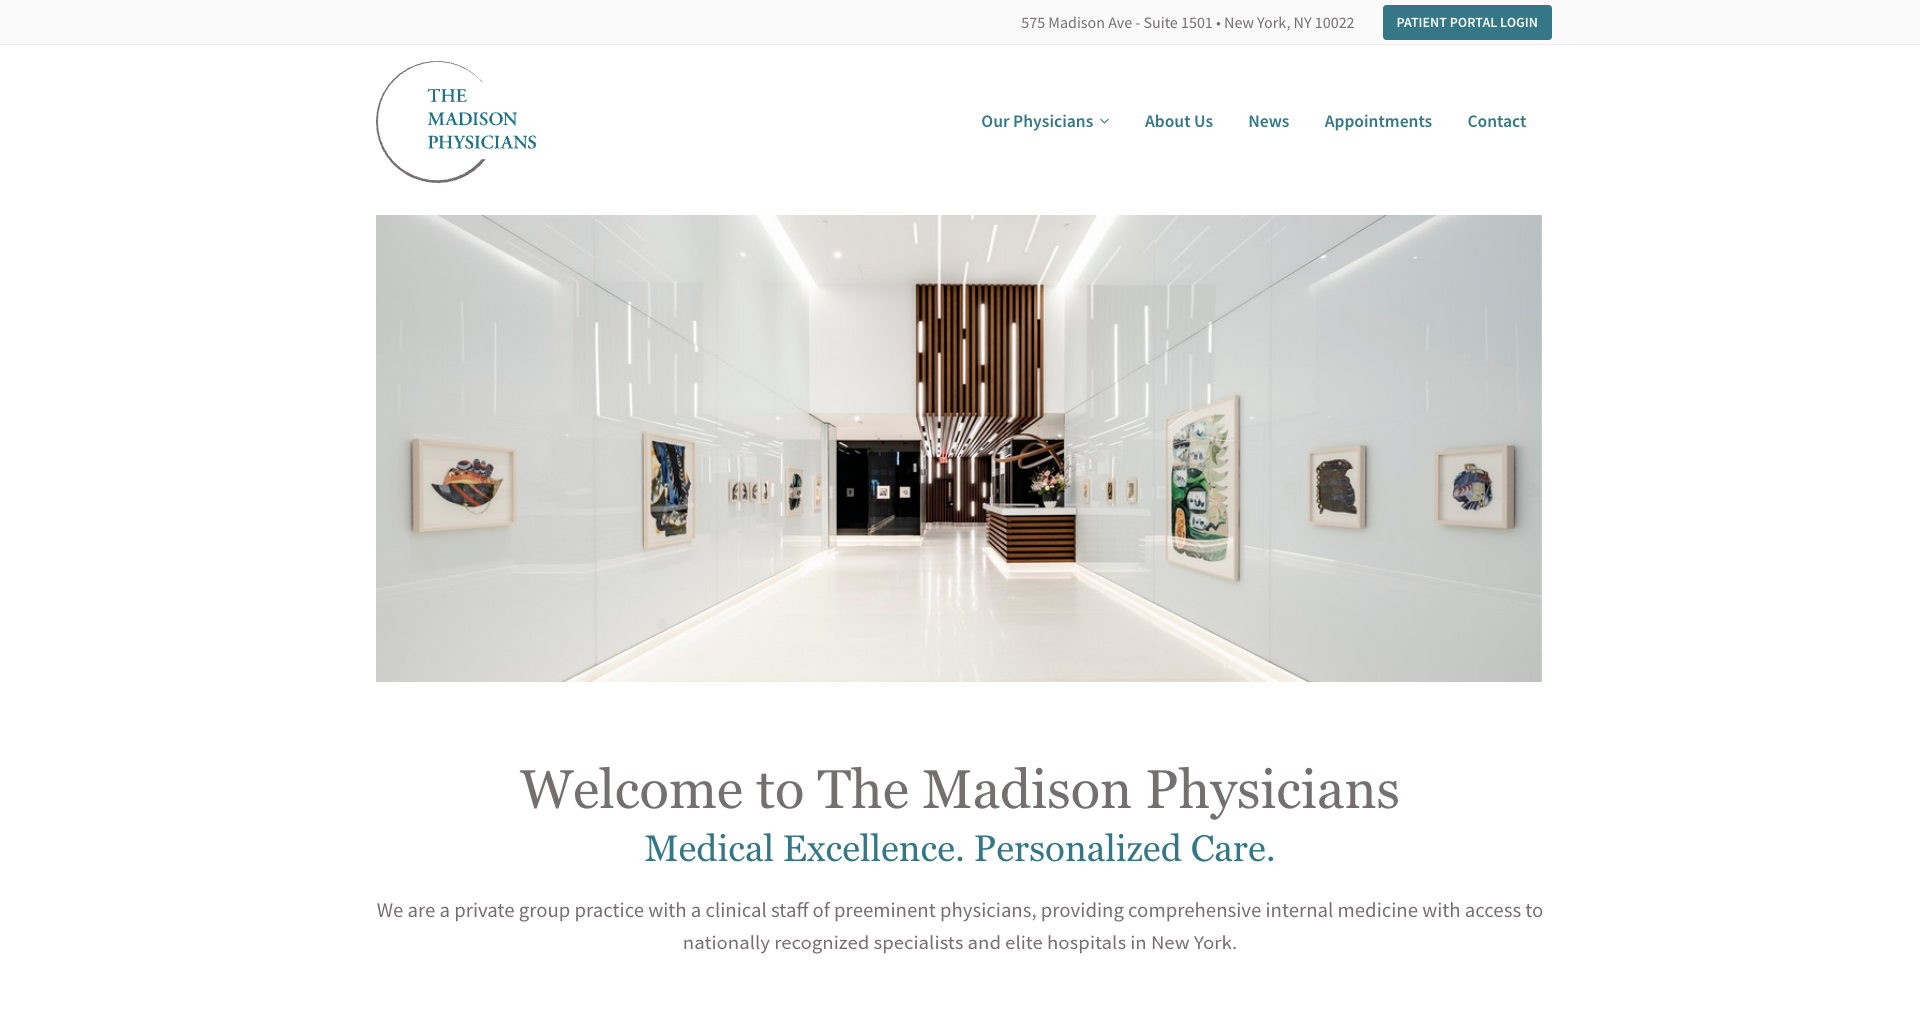 The Madison Physicians